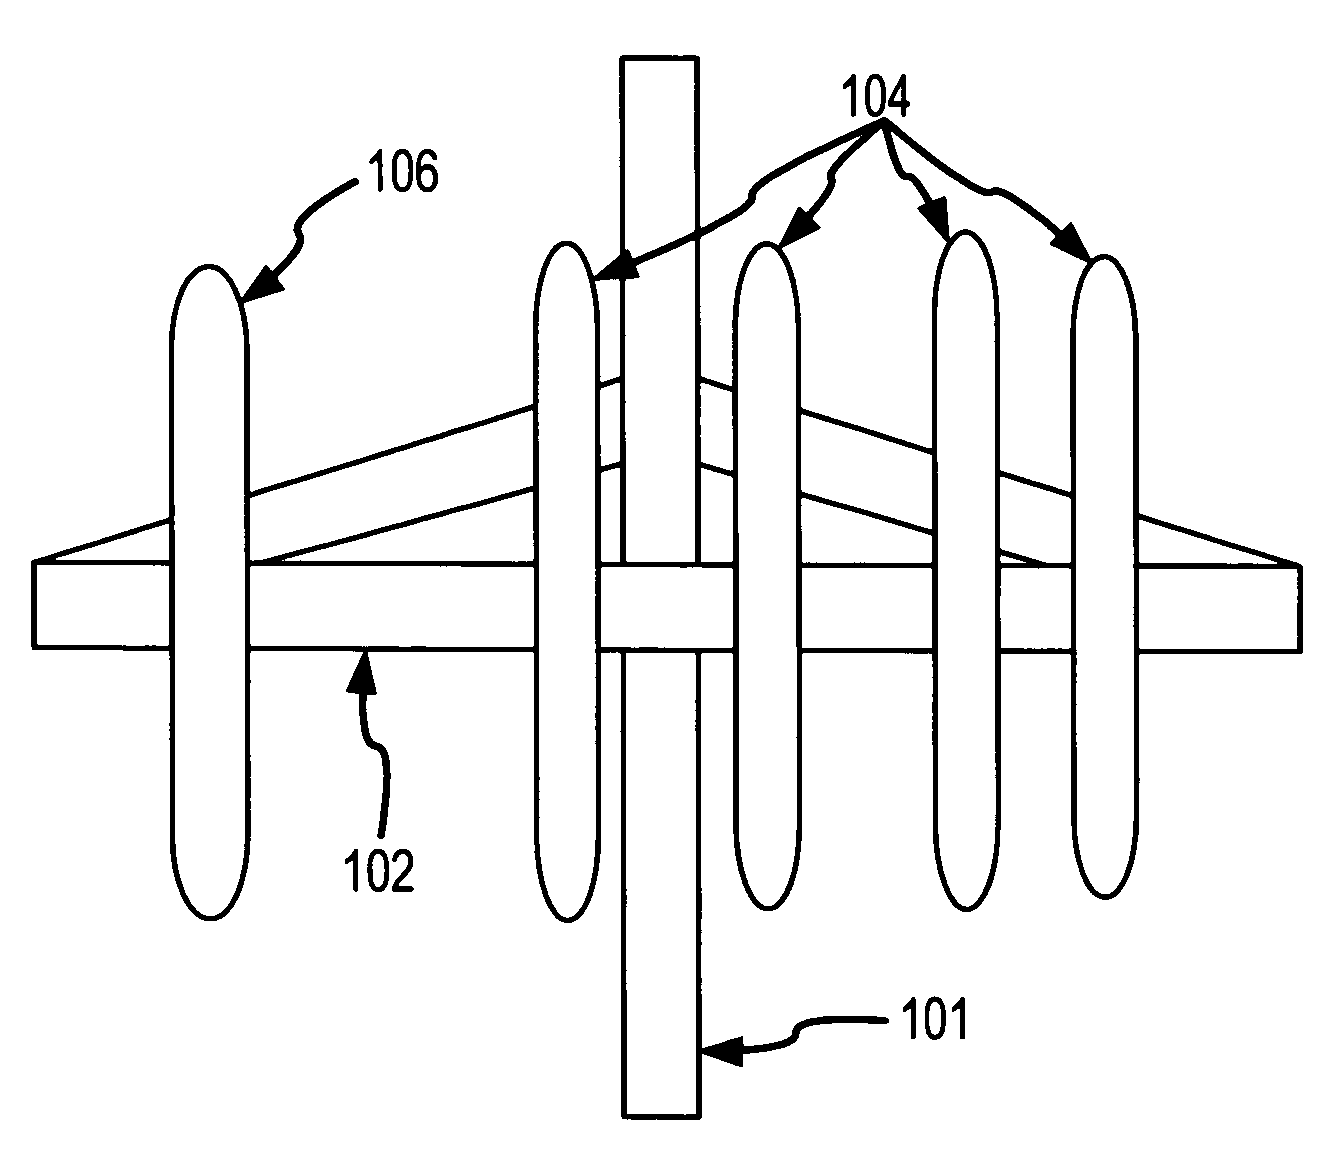 Multi-link antenna array that conforms to cellular leasing agreements for only one attachment fee